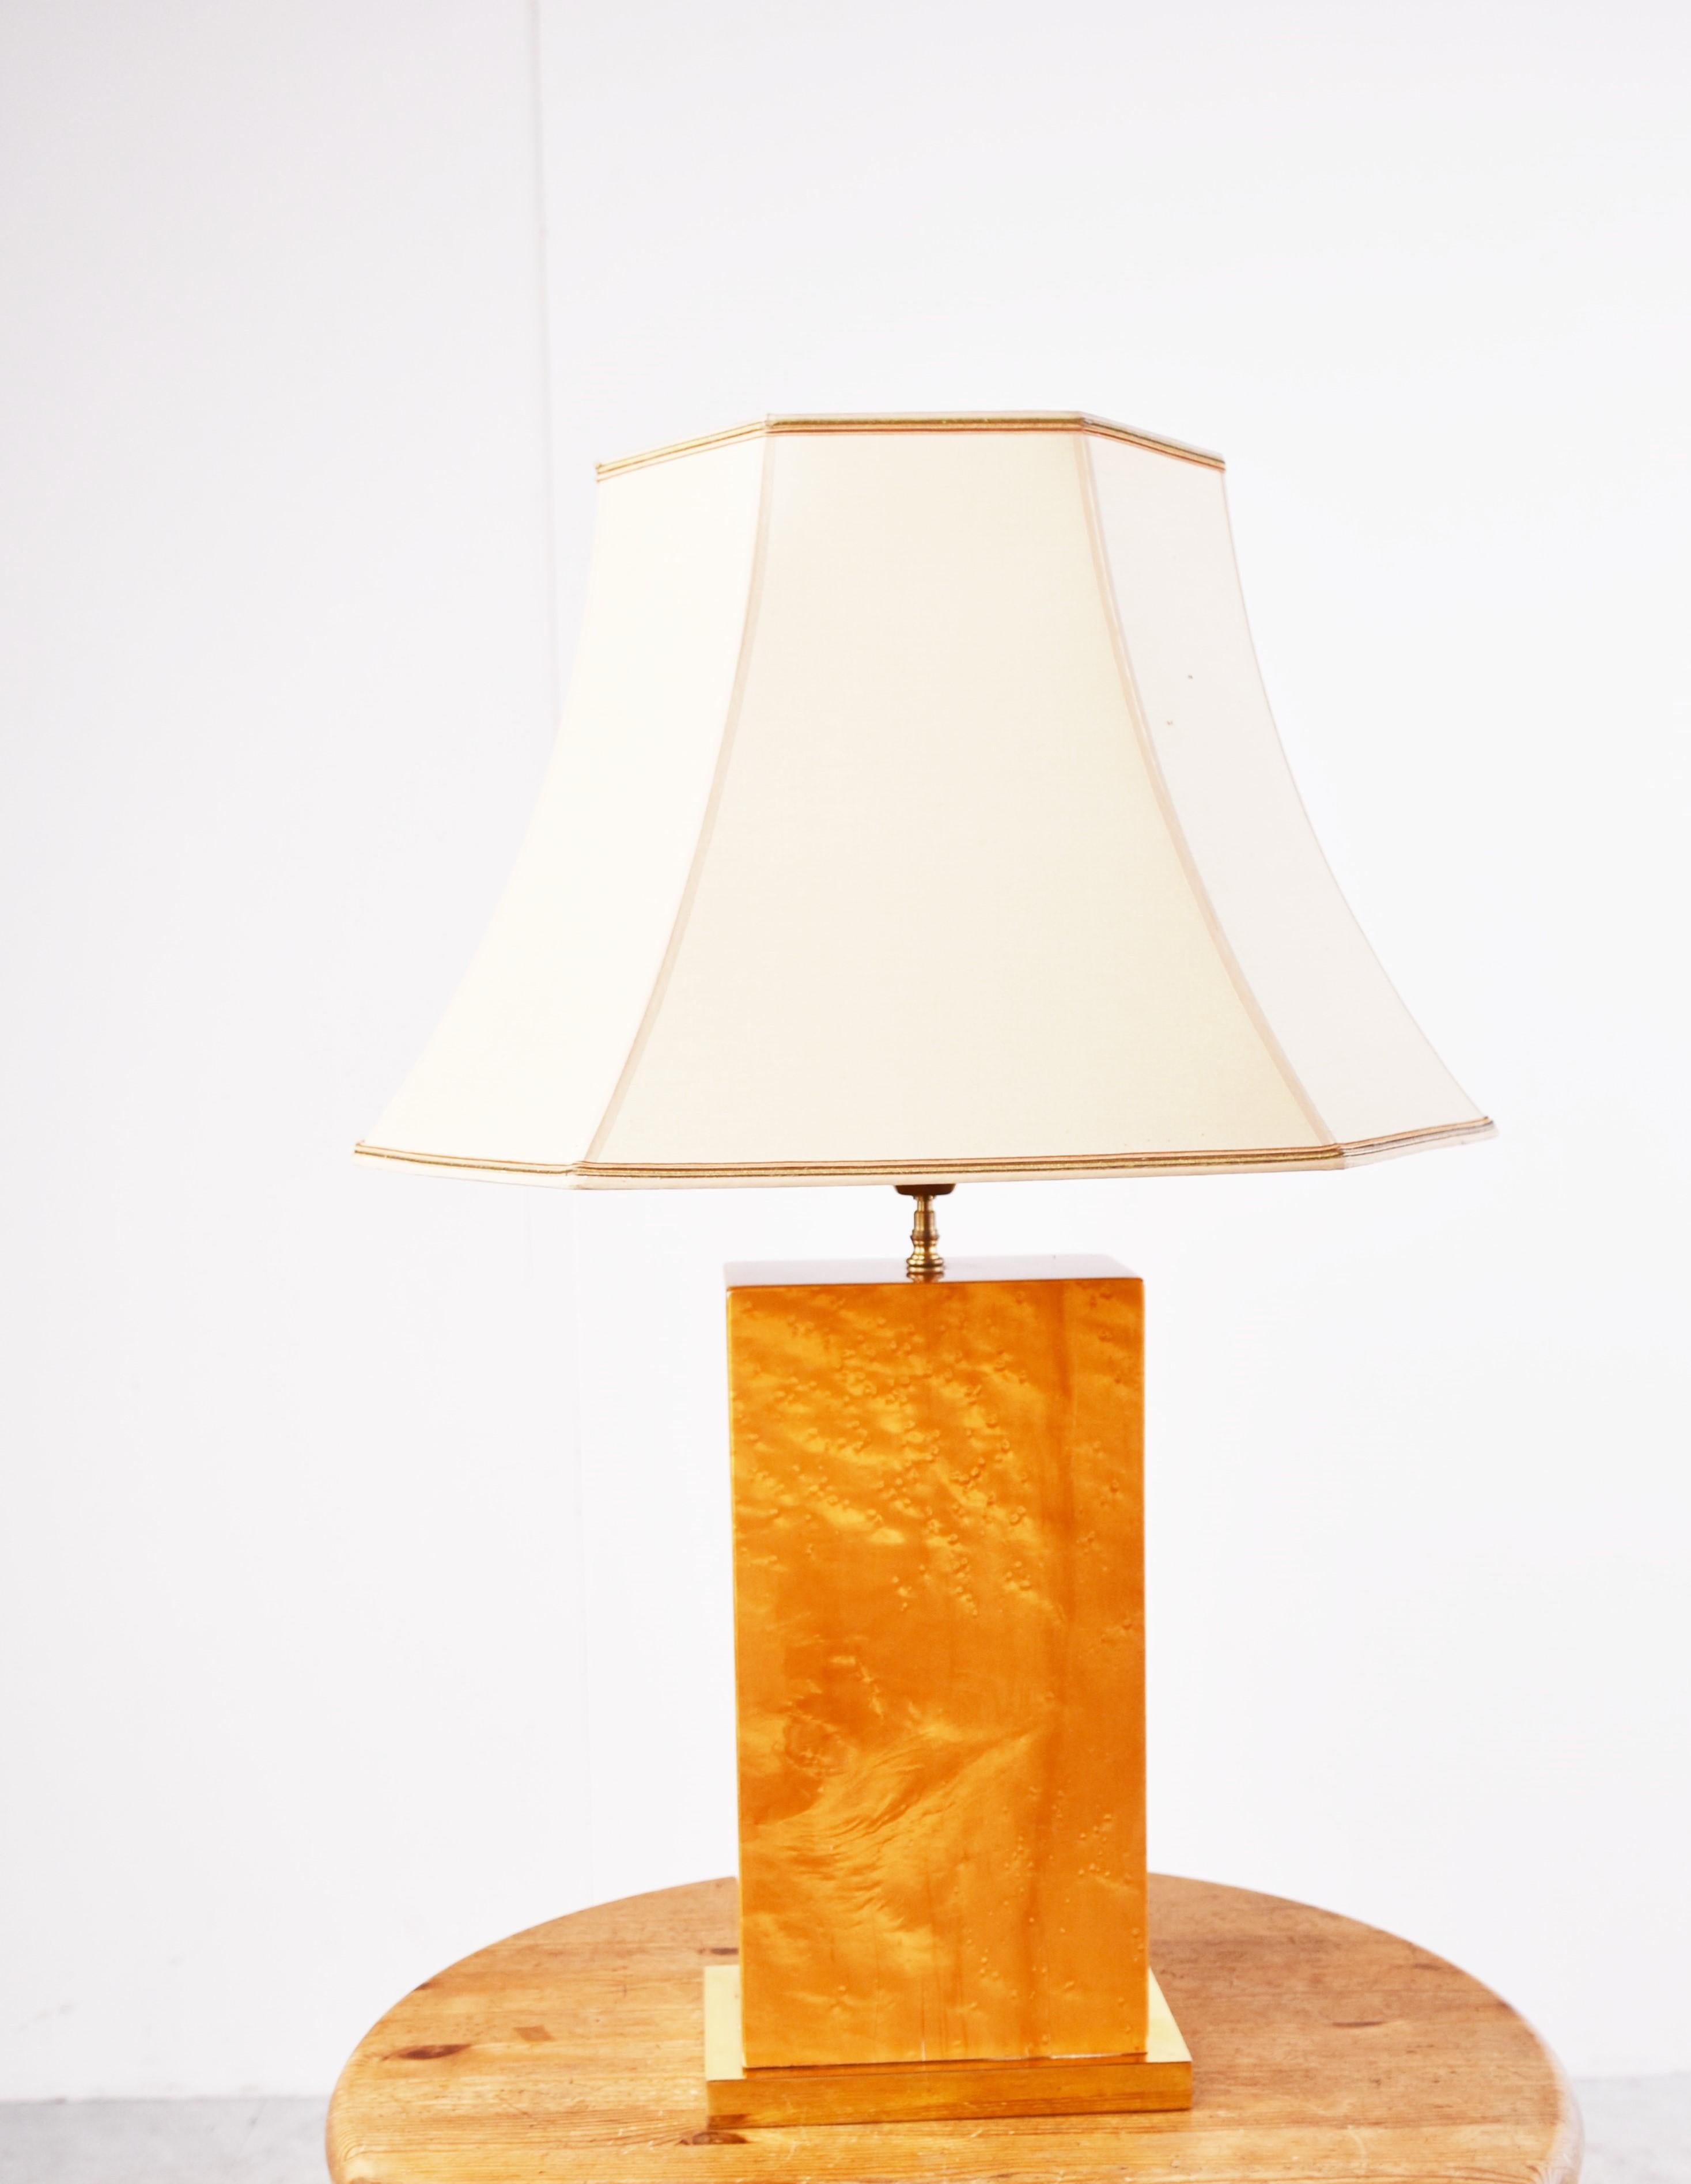 French Vintage Burl Wood Table Lamp, 1970s For Sale